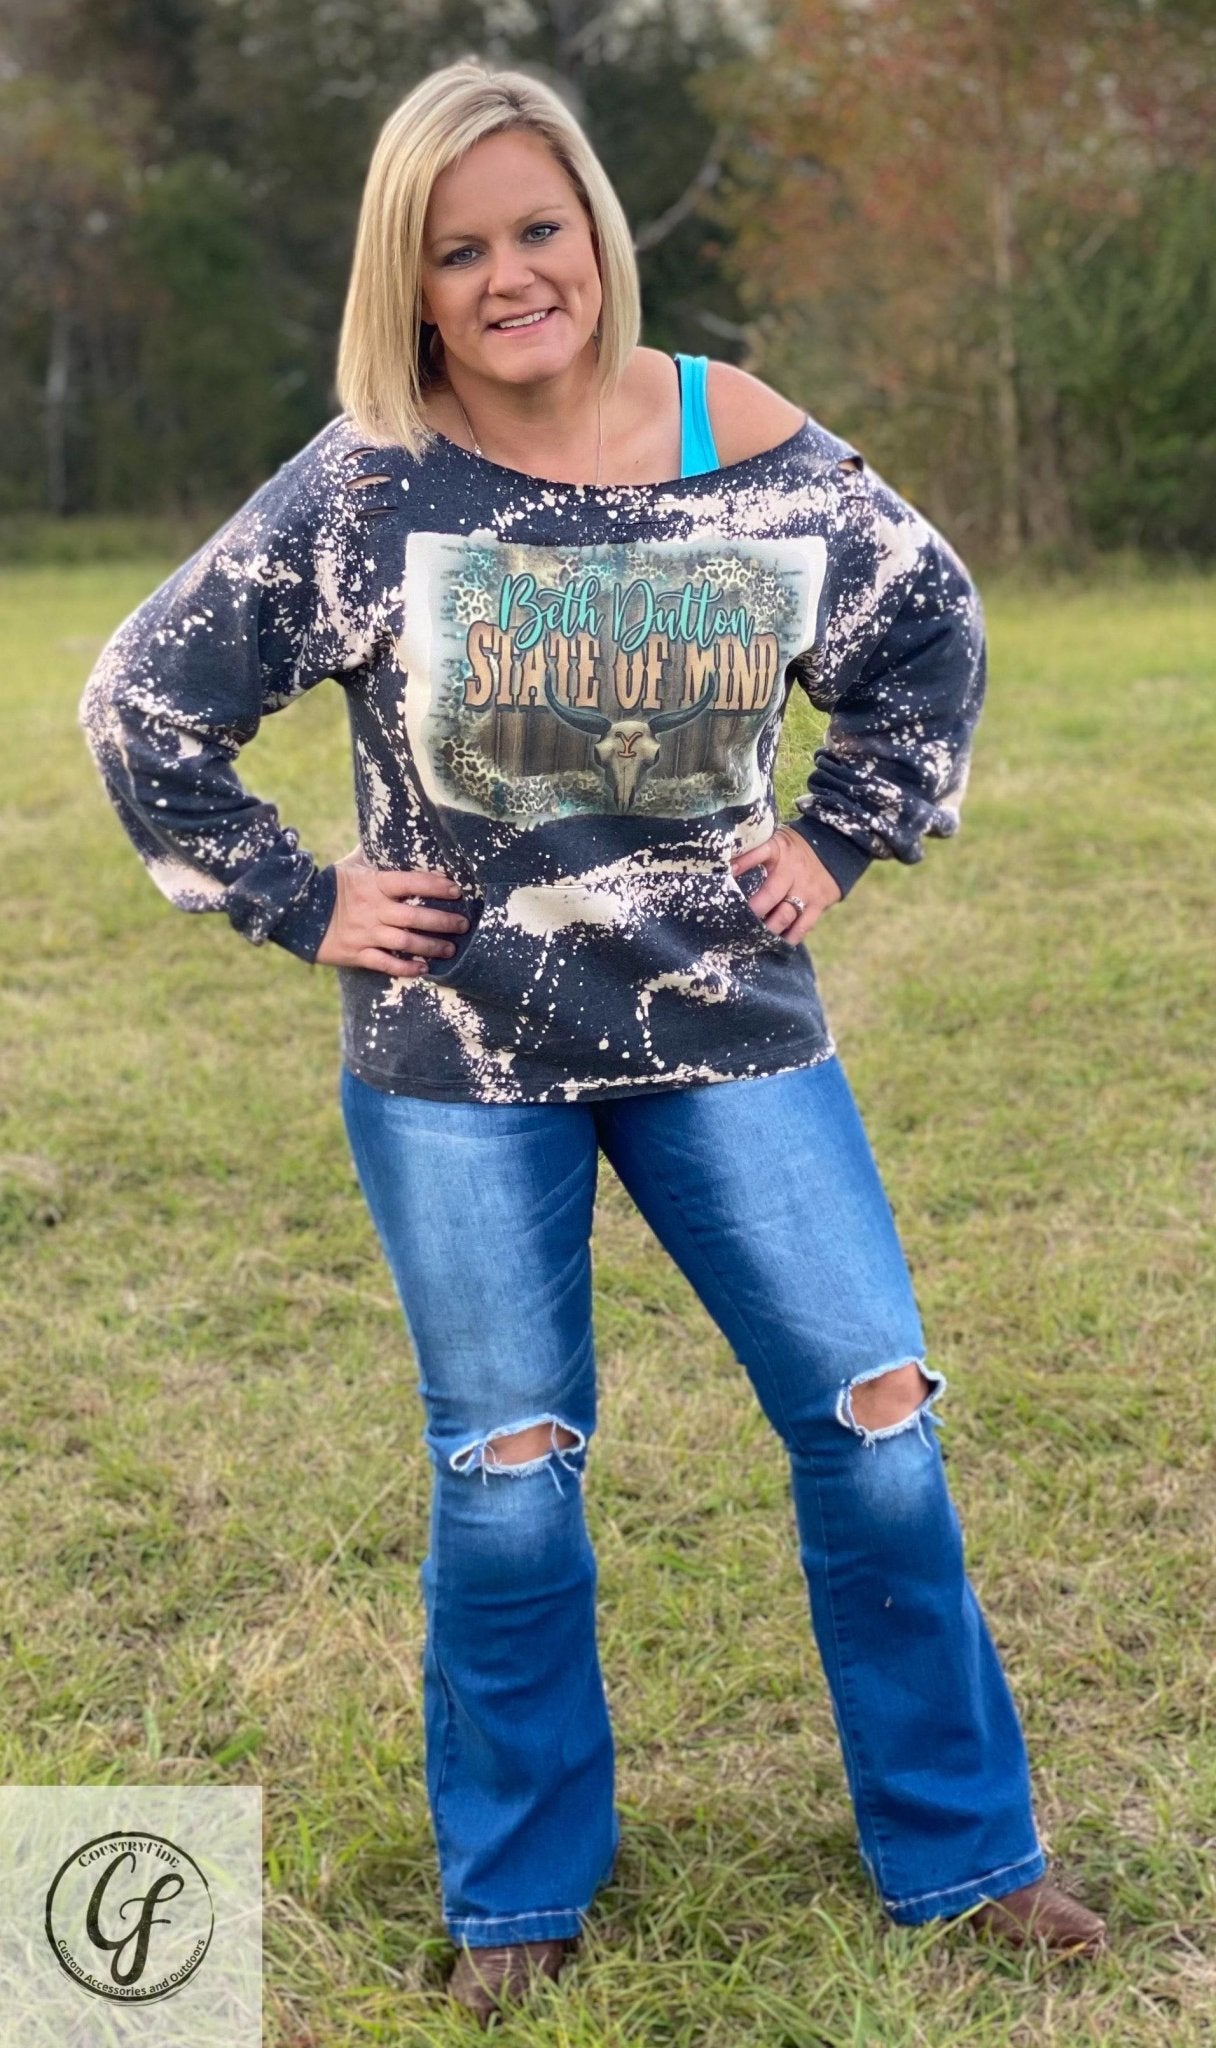 Beth State of Mind - CountryFide Custom Accessories and Outdoors